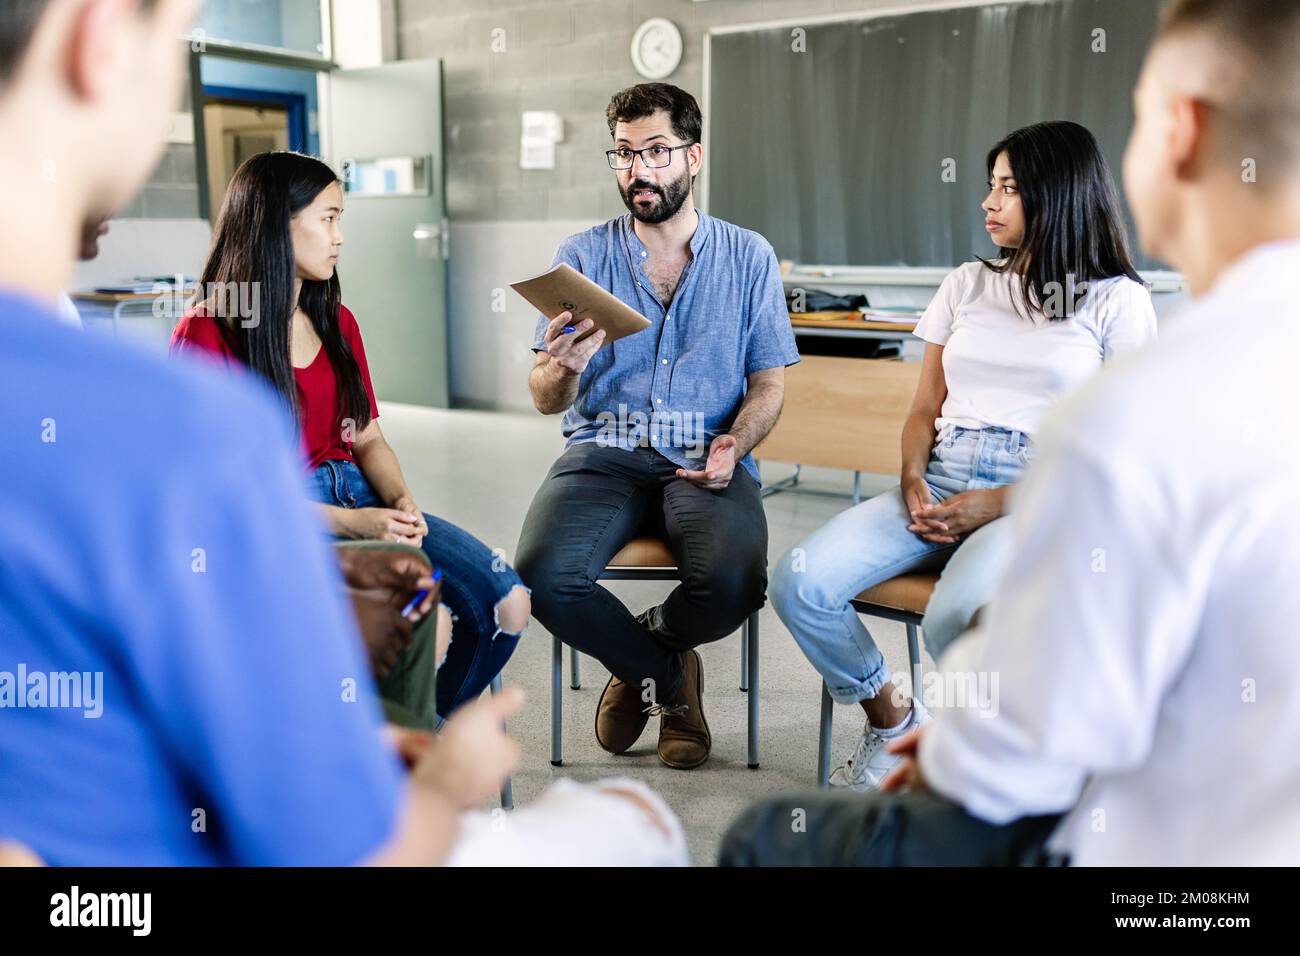 Diverse high school students taking with teacher during discussion group Stock Photo